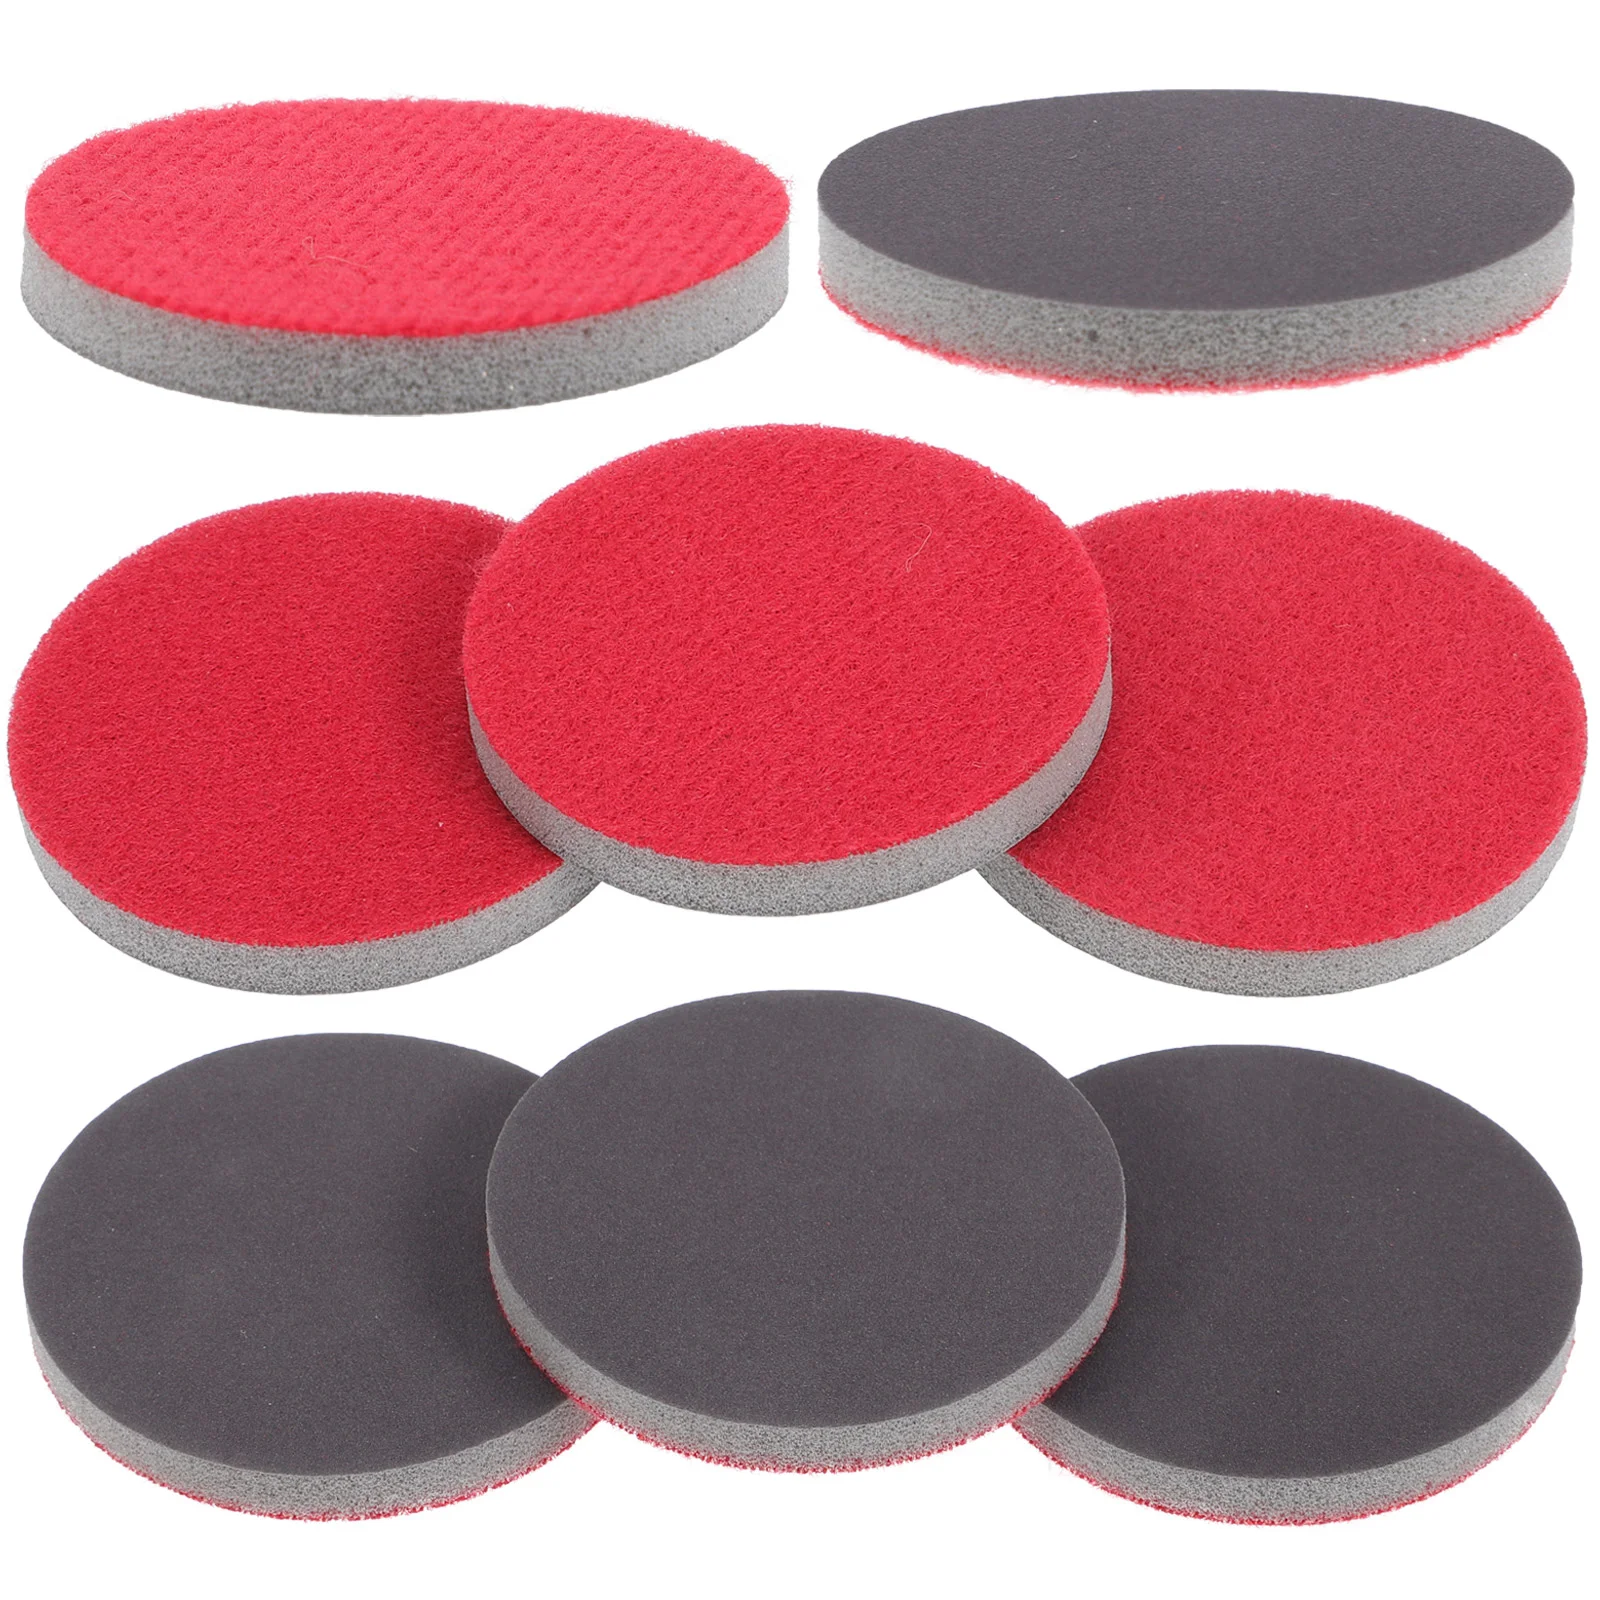 

8Pcs Sanding Bowling Cleaning Professional Bowling Pad Bowling Cleaning Pad for Resurfacing Sanding